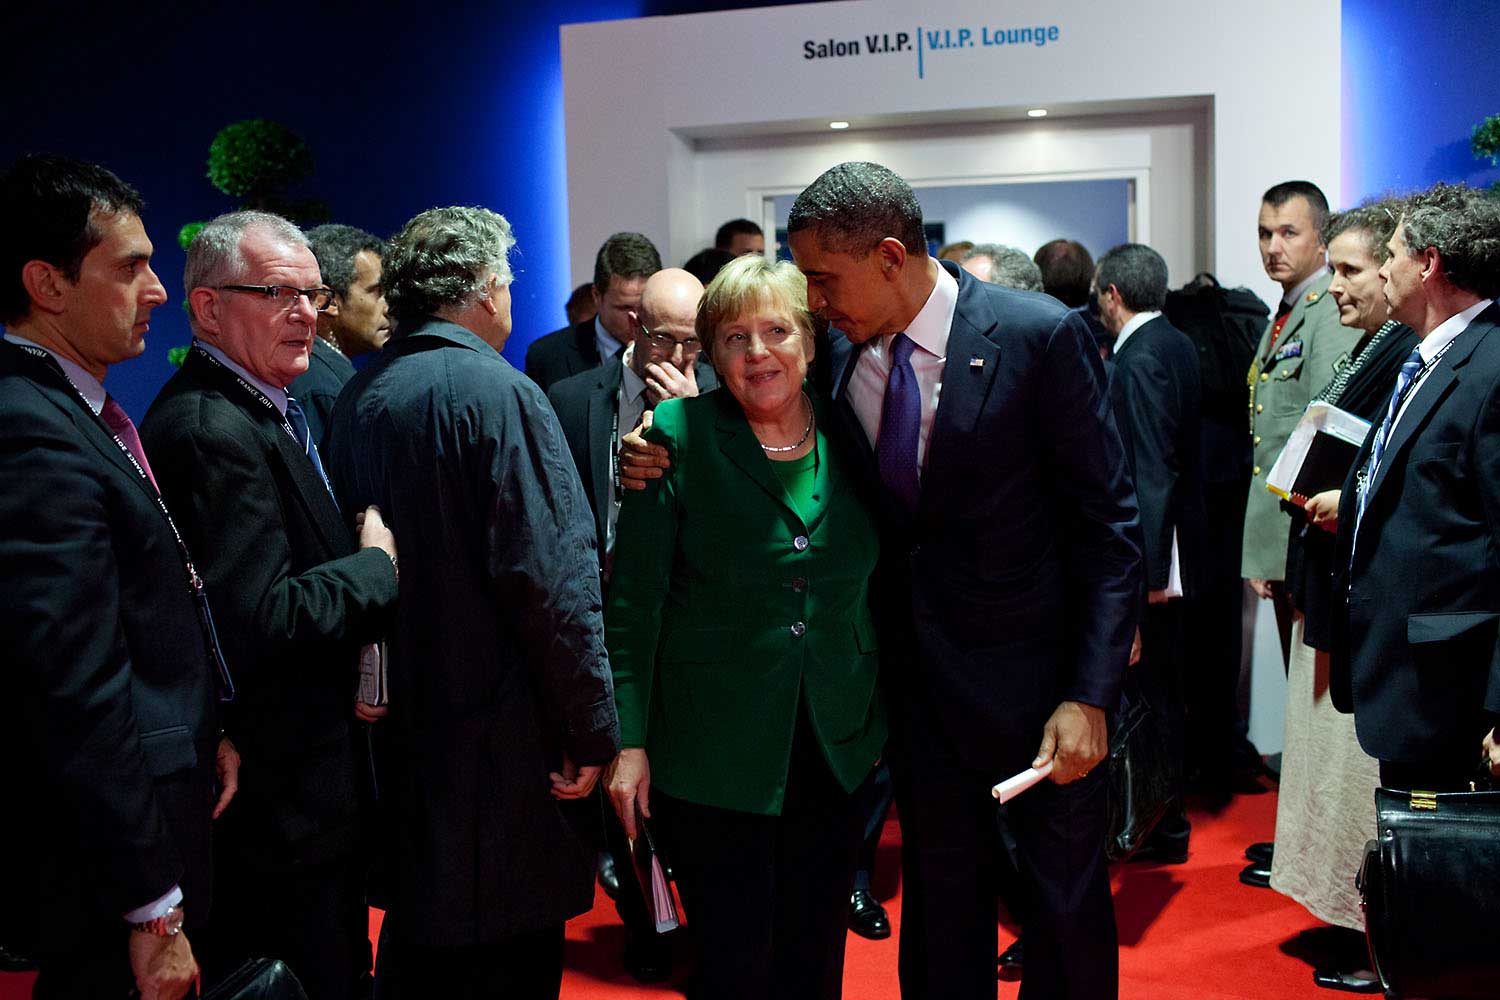 "After a meeting with Eurozone leaders adjacent to the G20 Summit in Cannes, France, the President gave encouragement to German Chancellor Angela Merkel as they departed the meeting, Nov. 3, 2011."